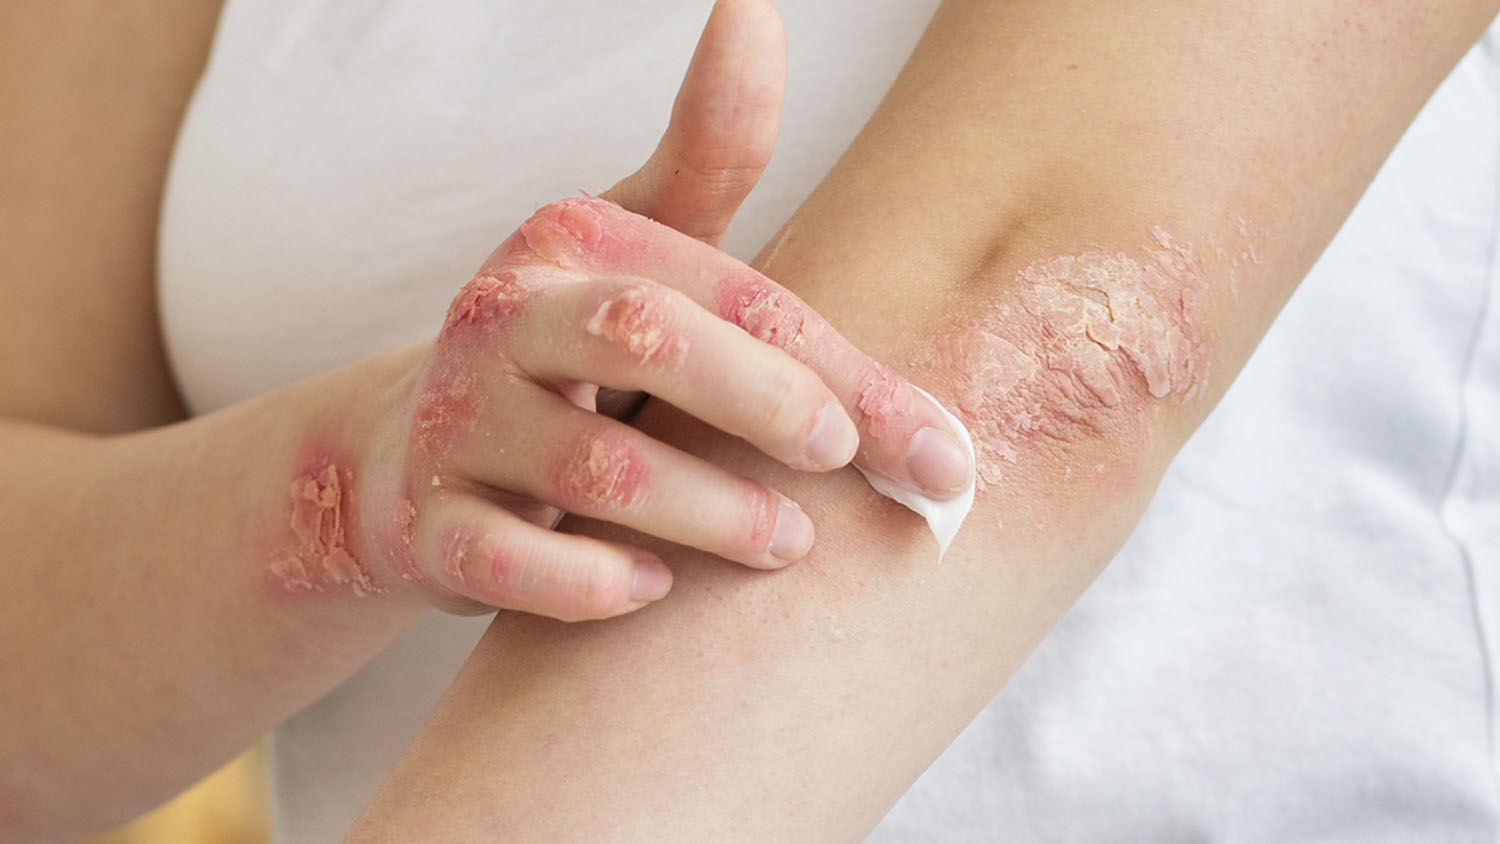 Contact Dermatitis to Nail Cosmetics | Current Dermatology Reports